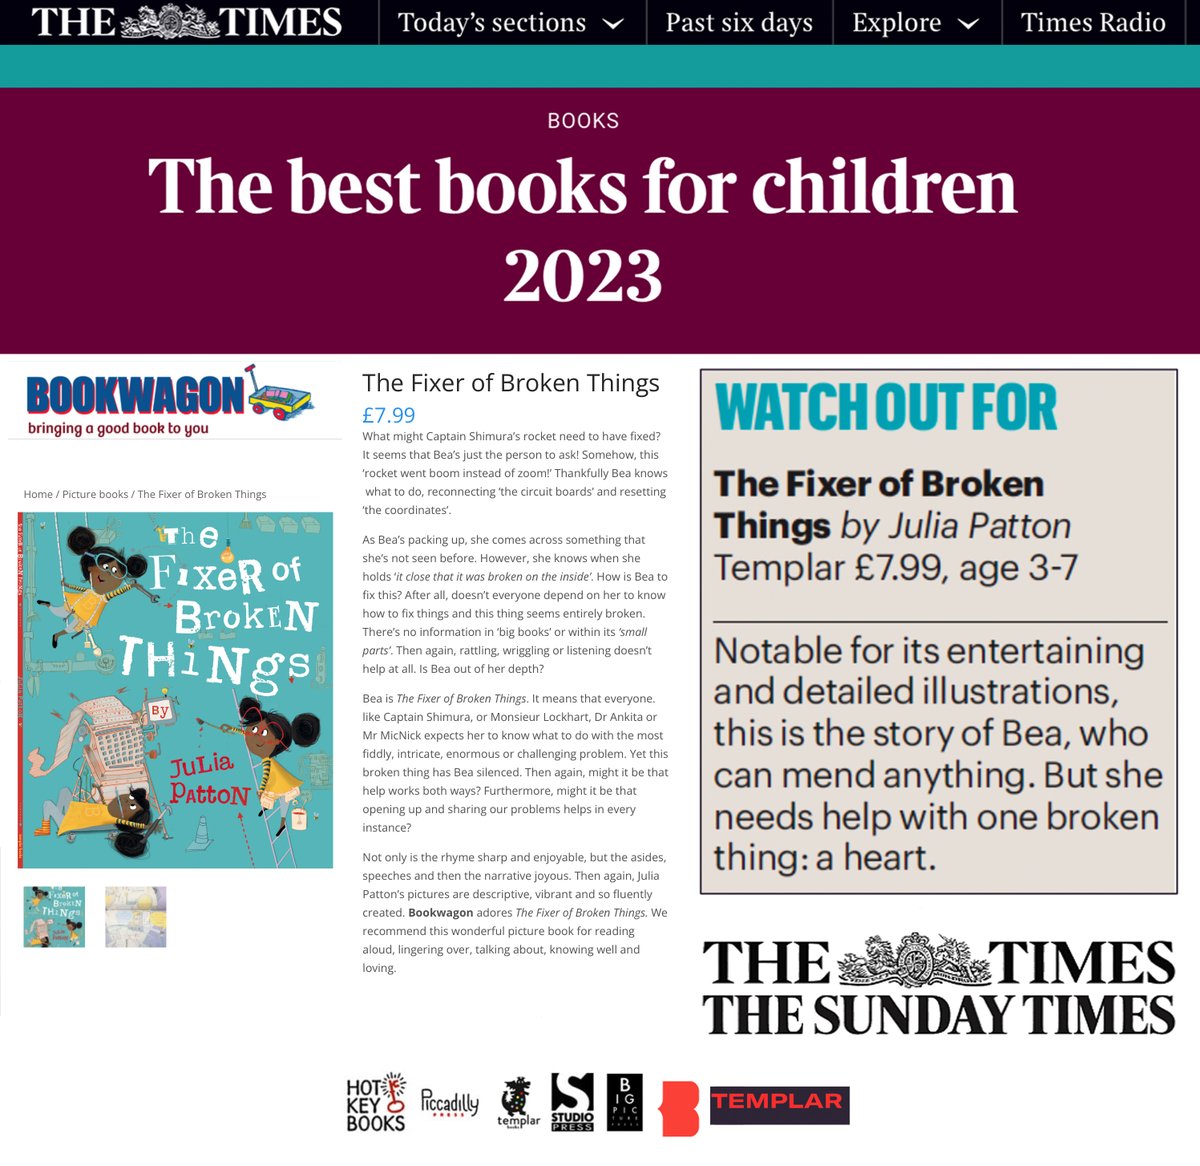 HAPPY #worldbookday23 Very grateful for a 'WATCH OUT FOR' ☞ from @thetimes @thetimesbooks @thesundaytimes_ @templarbooks special thanks to @NicoletteJones @genevievew22  #kidlit #childrensbooks #kidsbooks #kidlitart #picturebook #childrensbook #childrensbookillustration #author